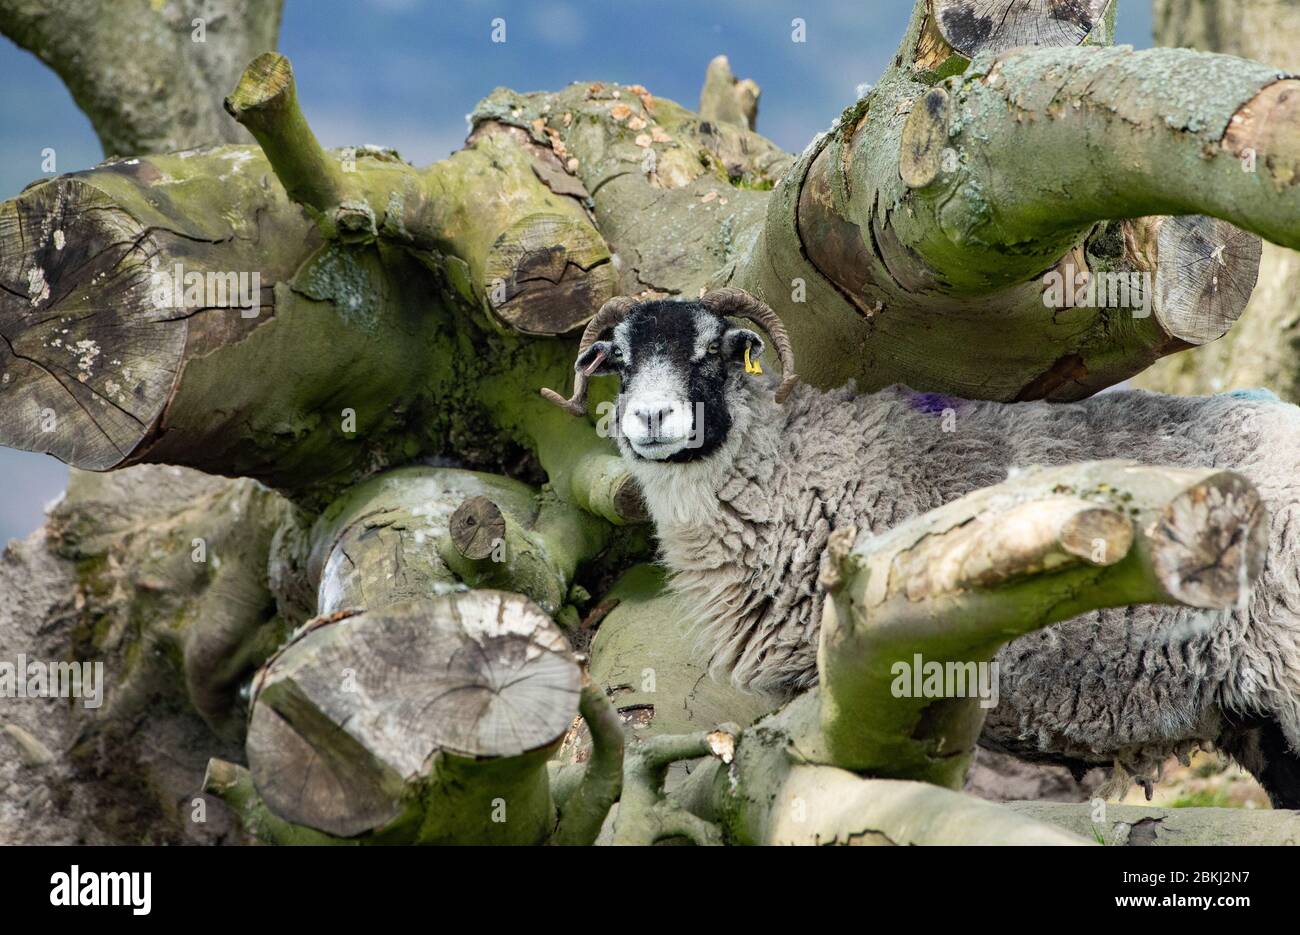 Preston, Lancashire, UK. 4th May, 2020. A Swaledale ewe enjoying another fine day in some of the best weather for lambing ever at Chipping, Preston, Lancashire. UK. Credit: John Eveson/Alamy Live News Stock Photo